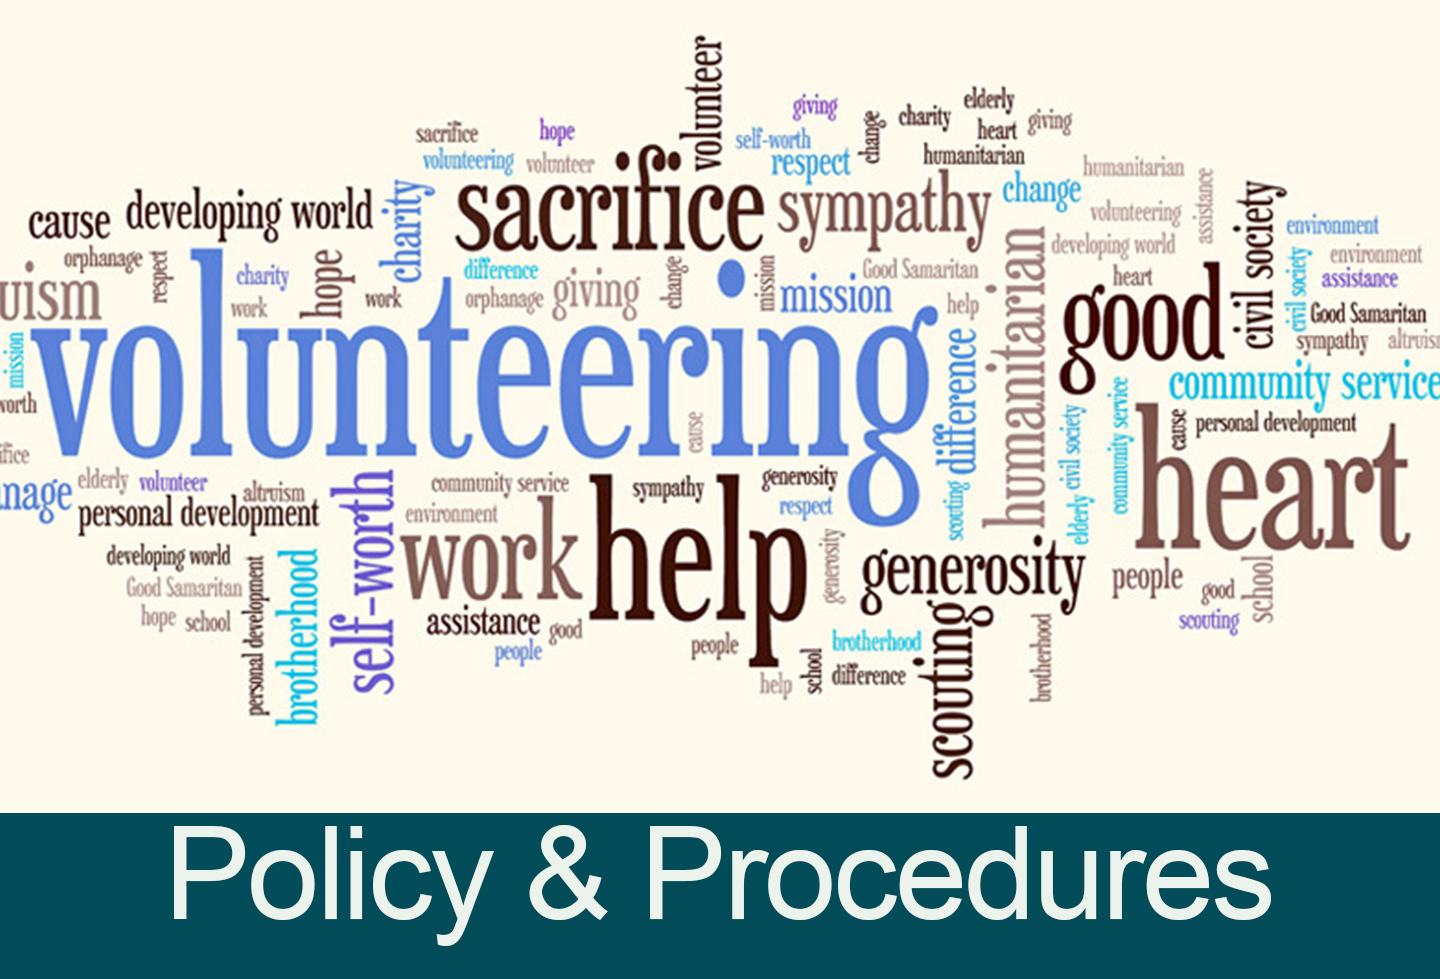 Policy and Procedures